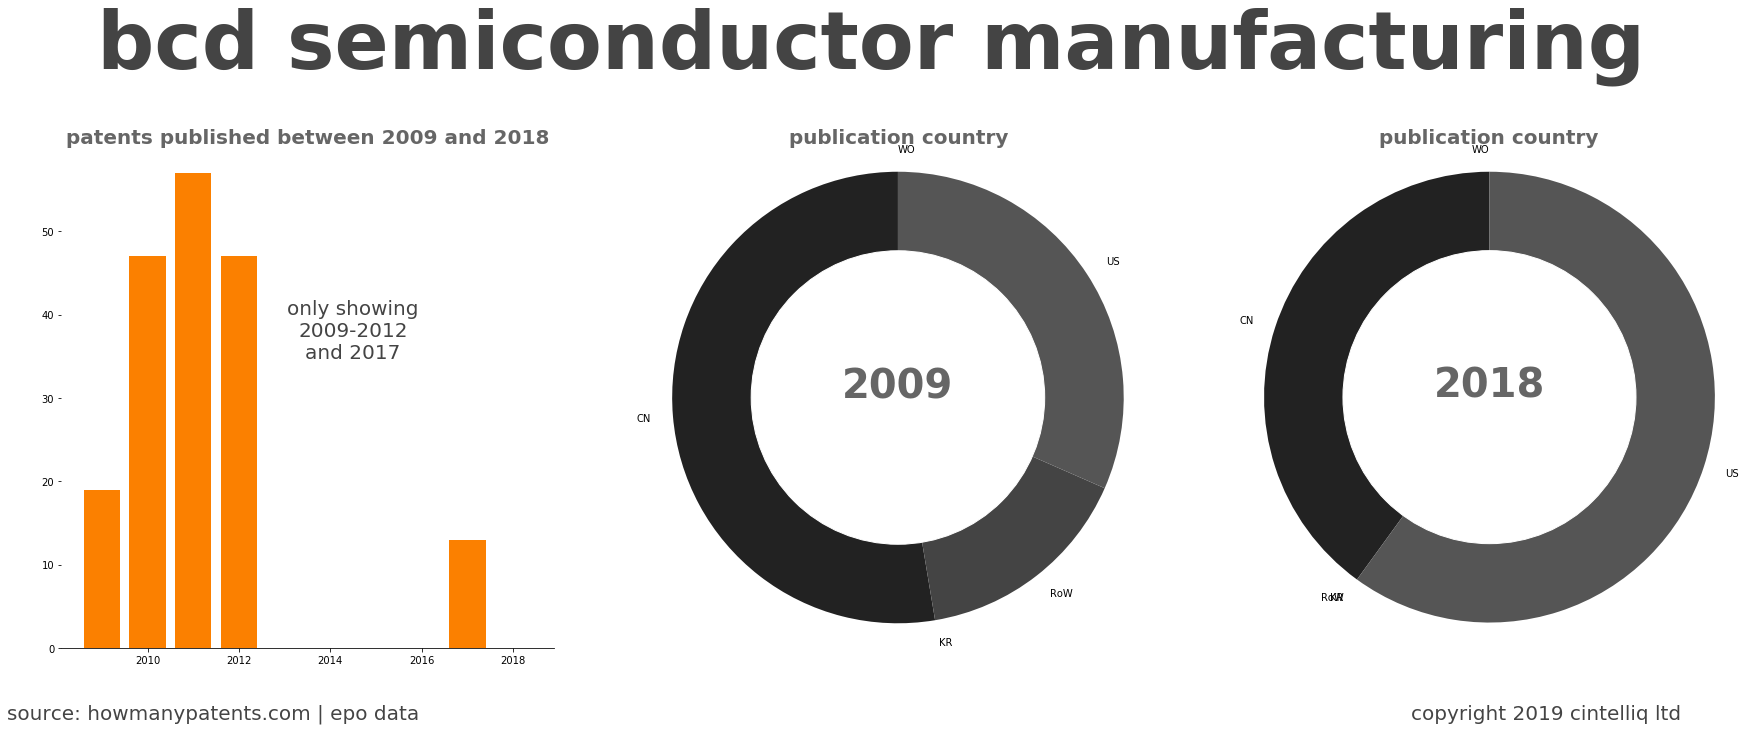 summary of patents for Bcd Semiconductor Manufacturing